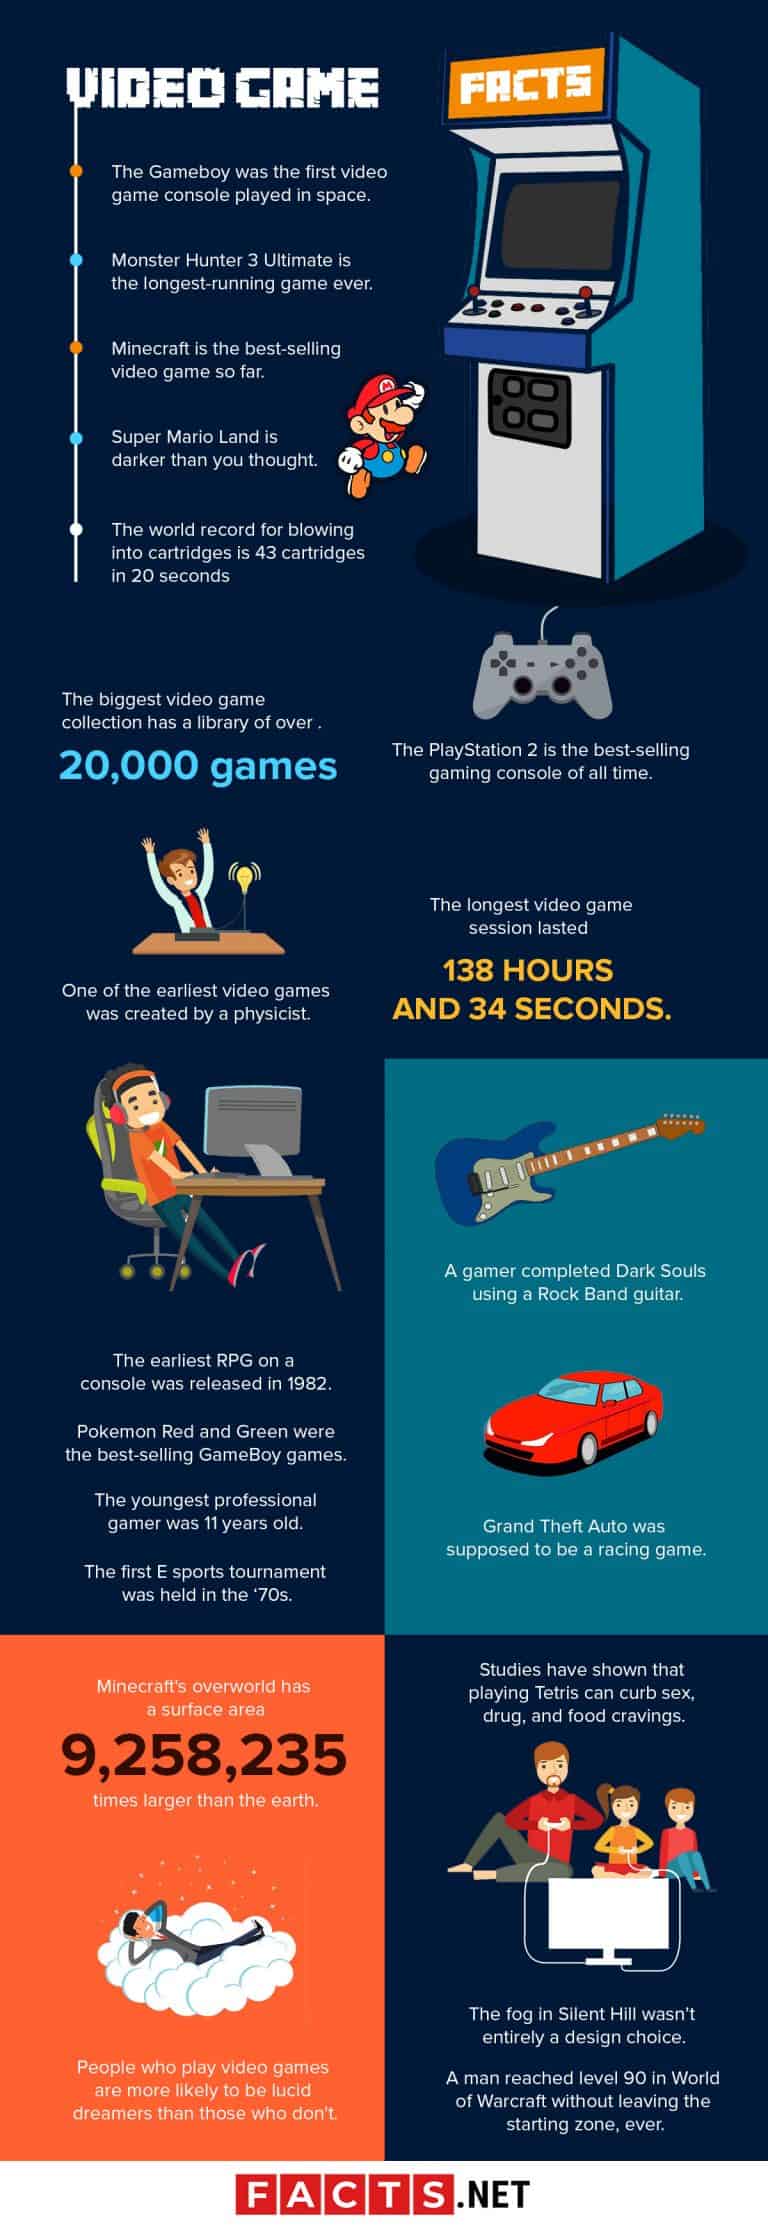 60 Winning Video Game Facts You Never Knew - Facts.net